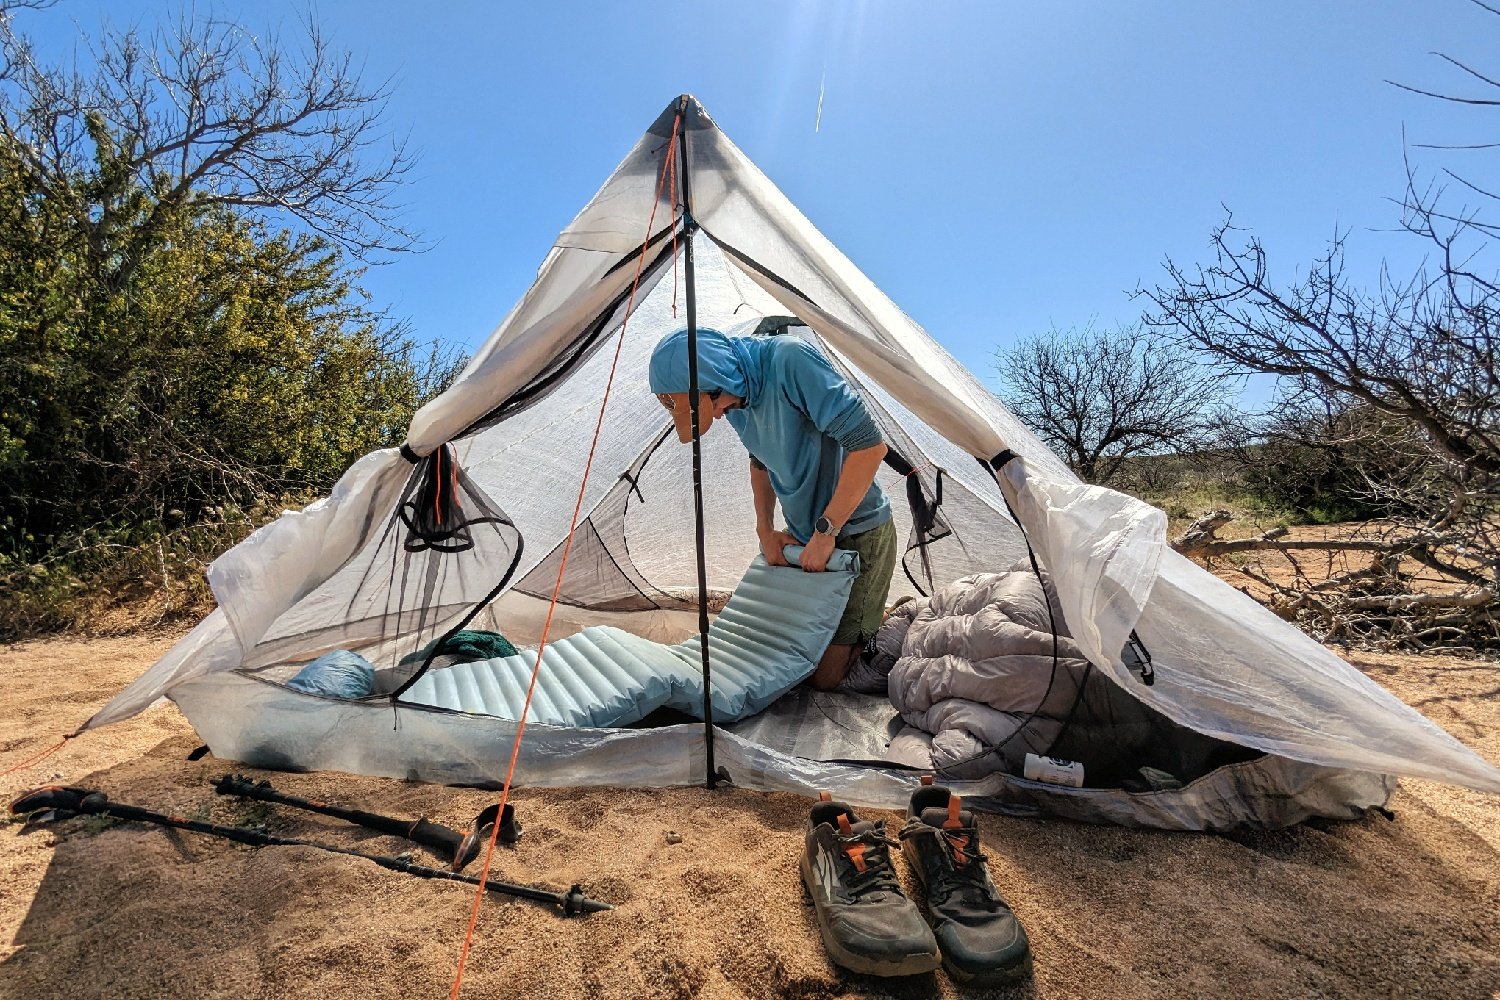 A hiker on his knees in the HMG Unbound 2 rolling up a sleeping pad - the doors and vestibule of the tent are open